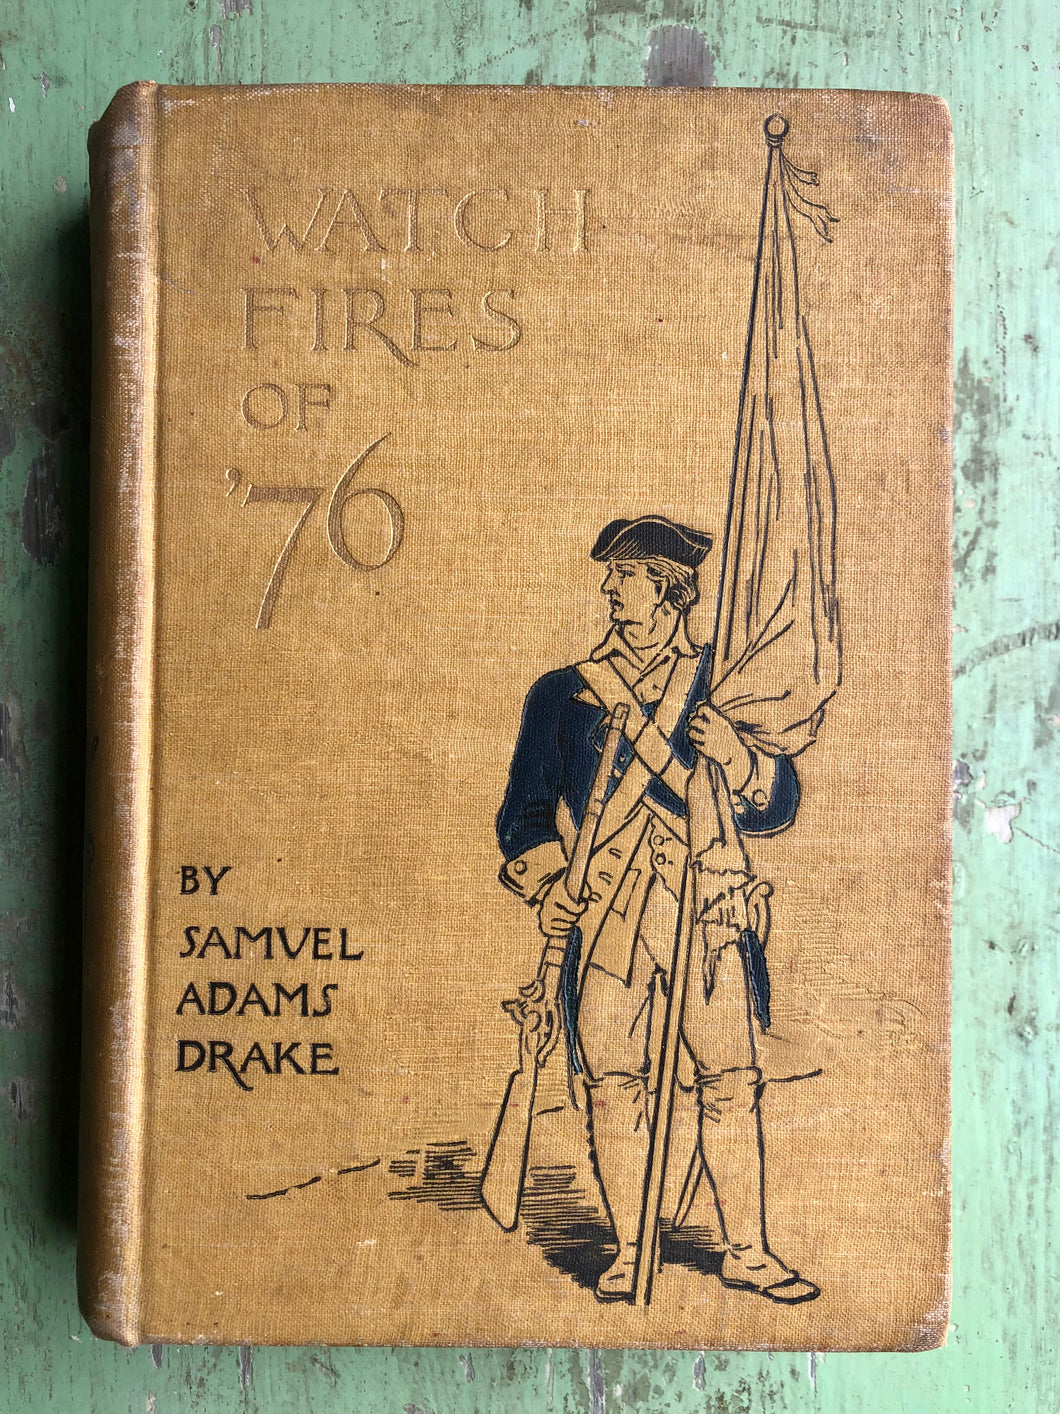 The Watch Fires of ‘76 by Samuel Adams Drake